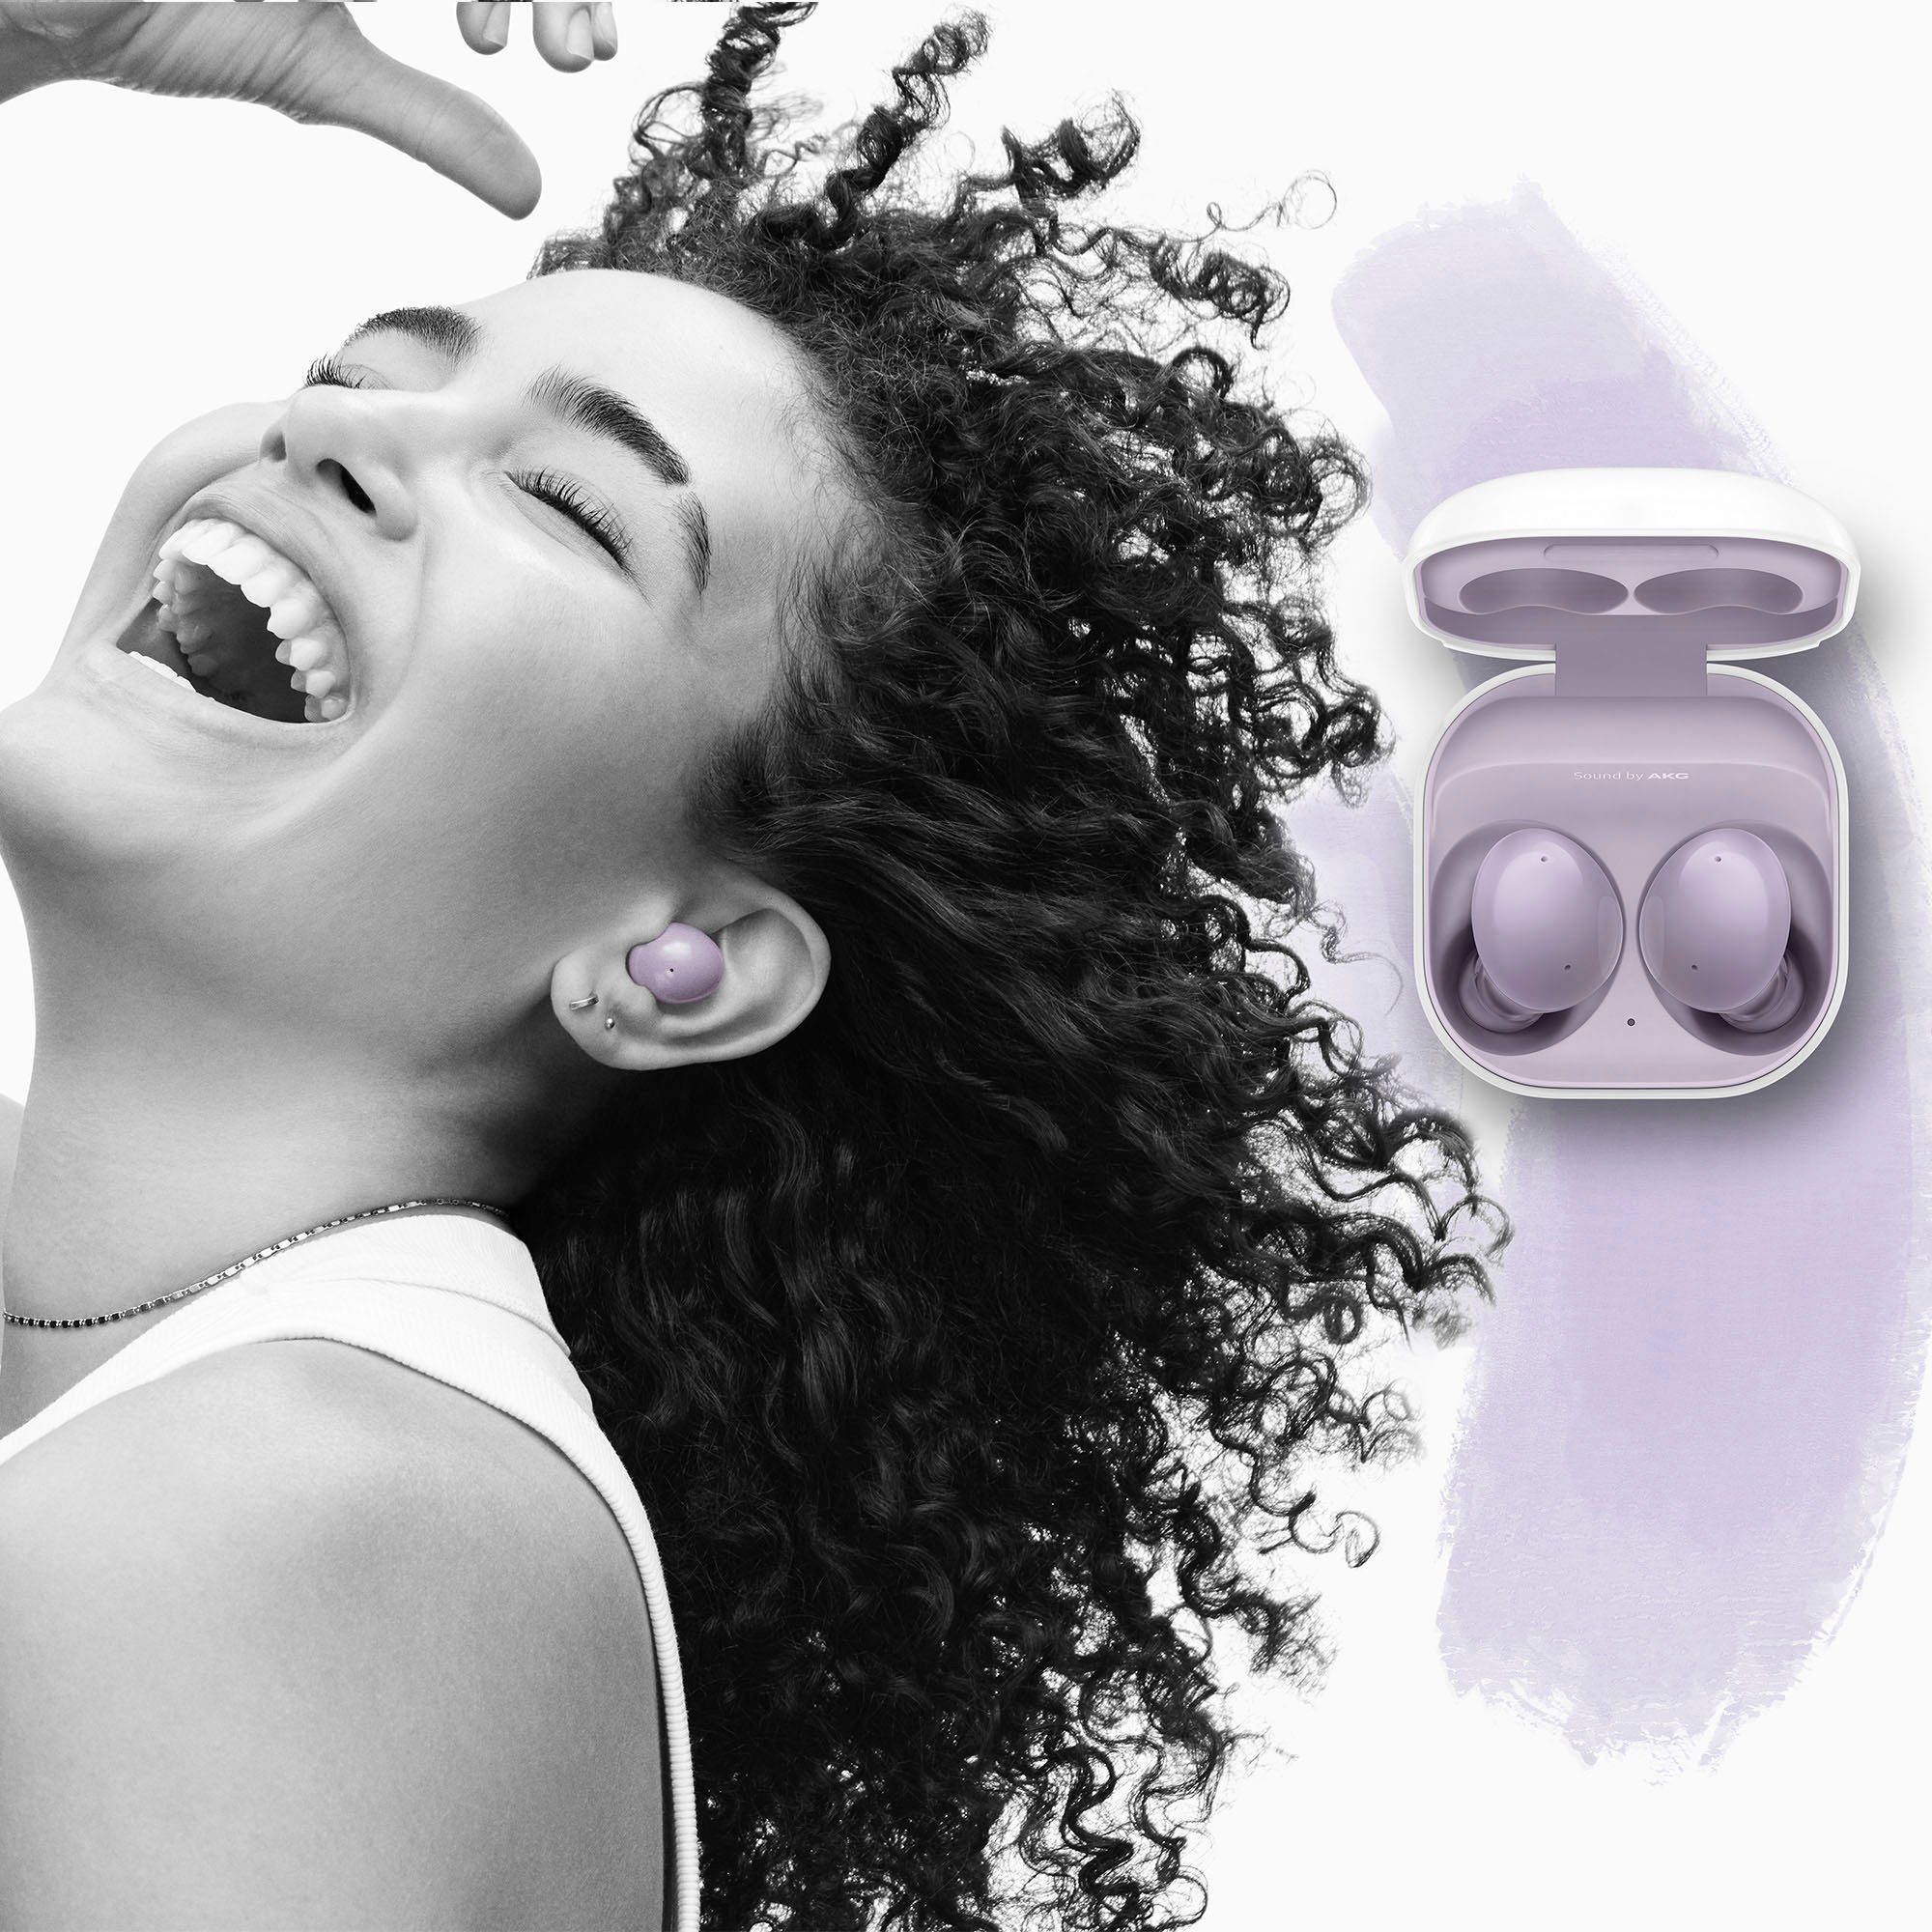 (Active Bluetooth) Noise (ANC), Cancelling Galaxy Olive Buds2 Samsung In-Ear-Kopfhörer